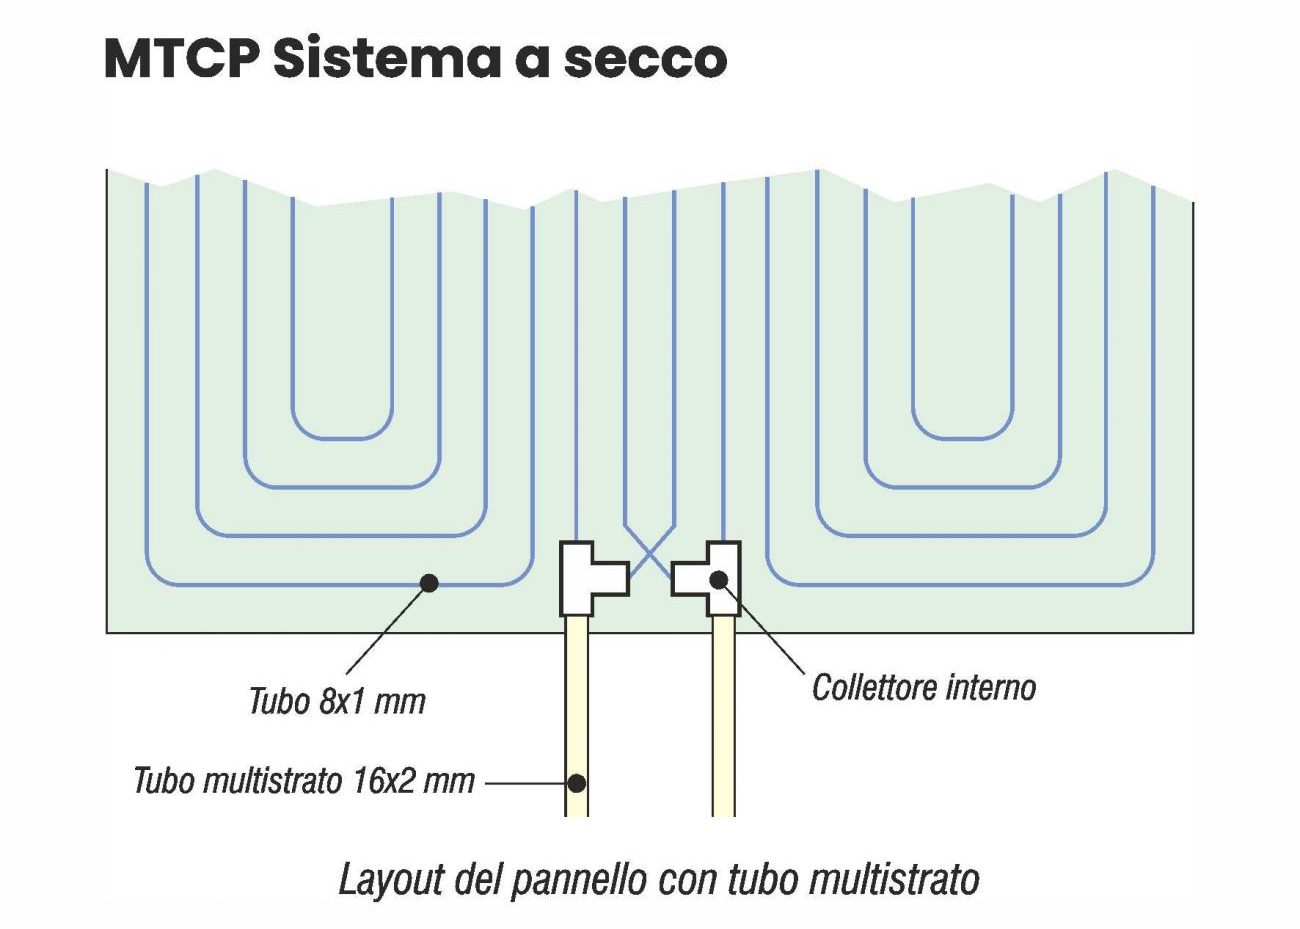 WALL-CELING_Layout-Pannello_MTCP(Bampi)